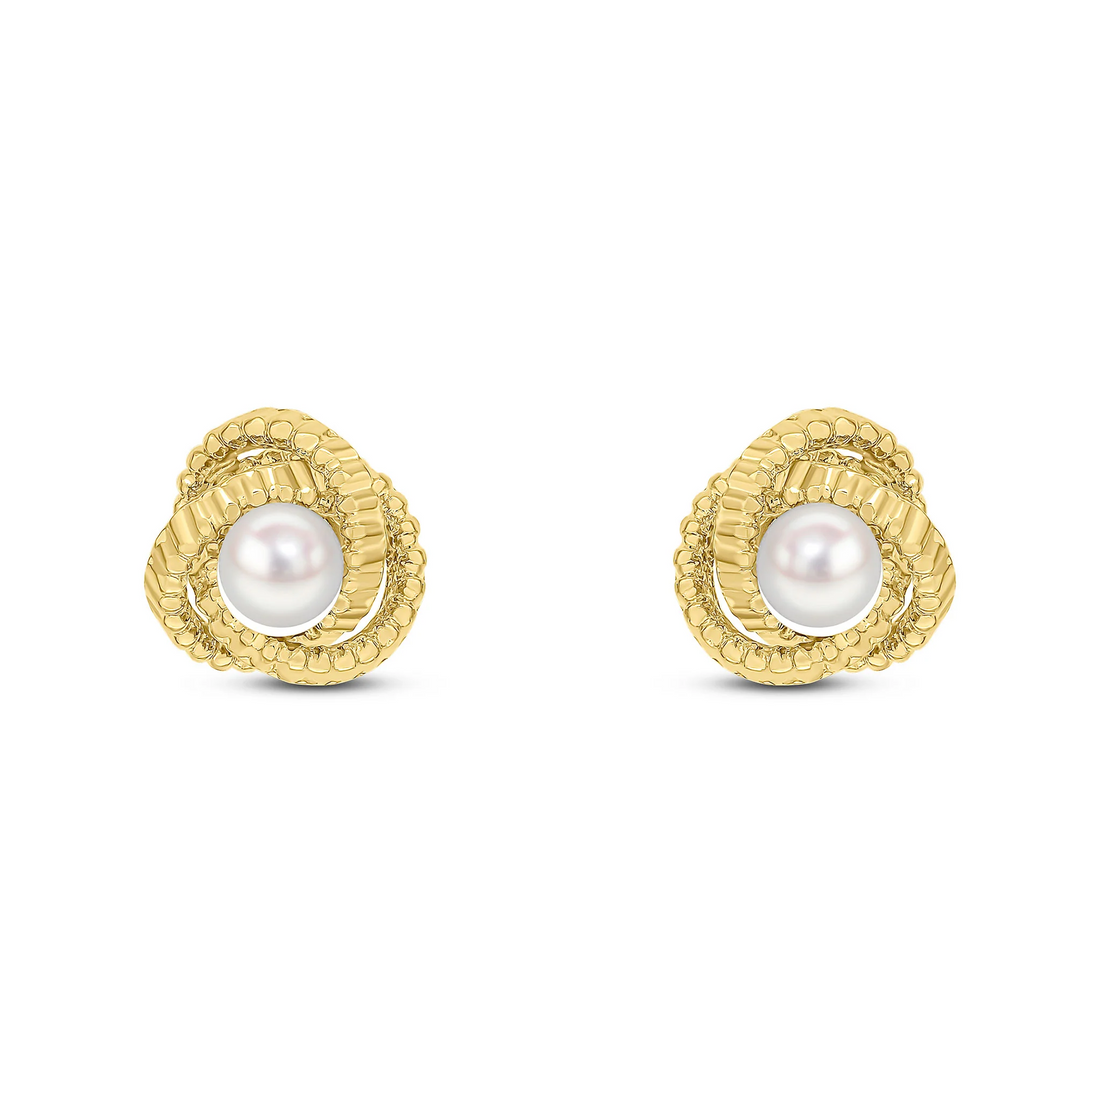 9CT Yellow Gold Textured Knot Stud Earrings with 5mm Pearl - Robert Anthony Jewellers, Edinburgh